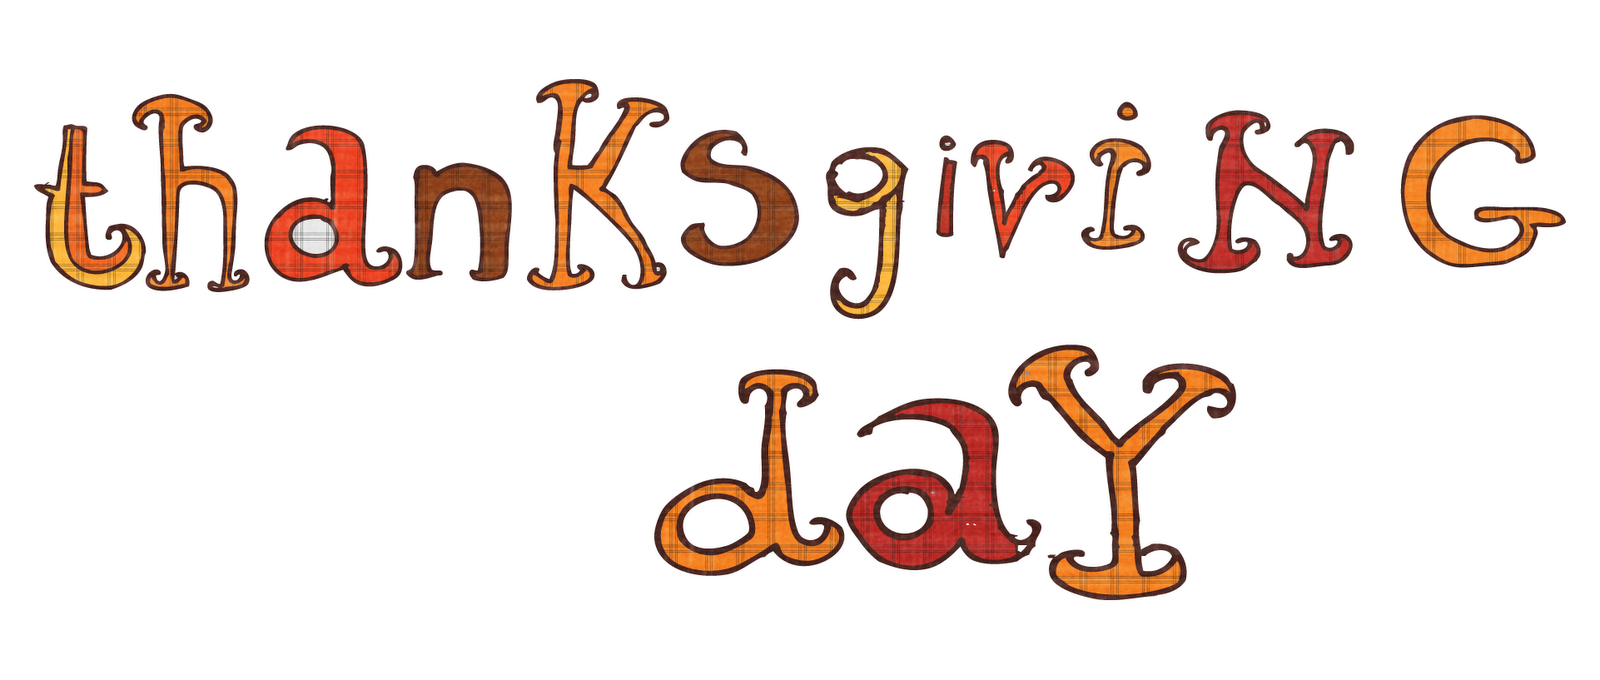 Thanksgiving Day 2021 Image, Wallpaper, Picture, Photo, Pics Download In HD Celebrat, Daily Celebrations Ideas, Holidays & Festivals